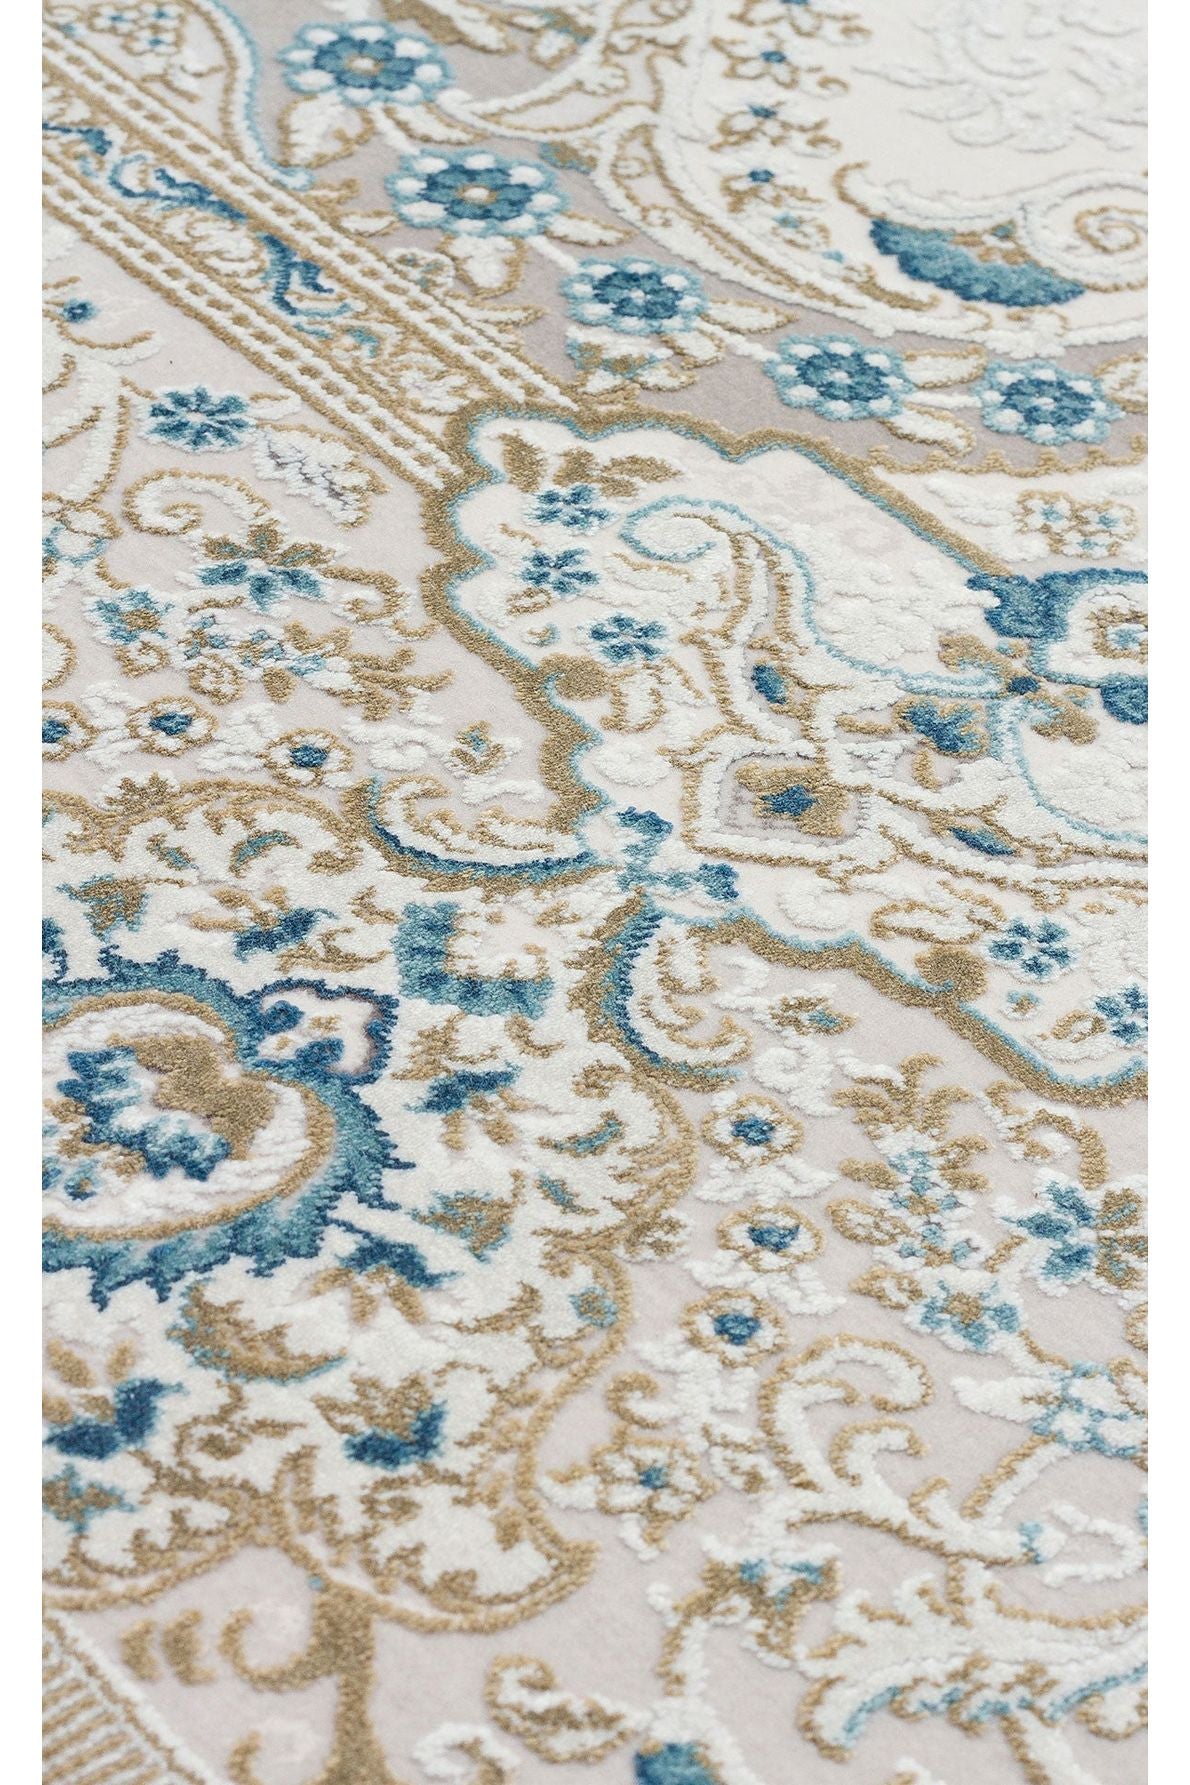 #Turkish_Carpets_Rugs# #Modern_Carpets# #Abrash_Carpets#High Density Woven Modern Made Carpet With Acrylic And ViscosePlm 01 Cream Blue